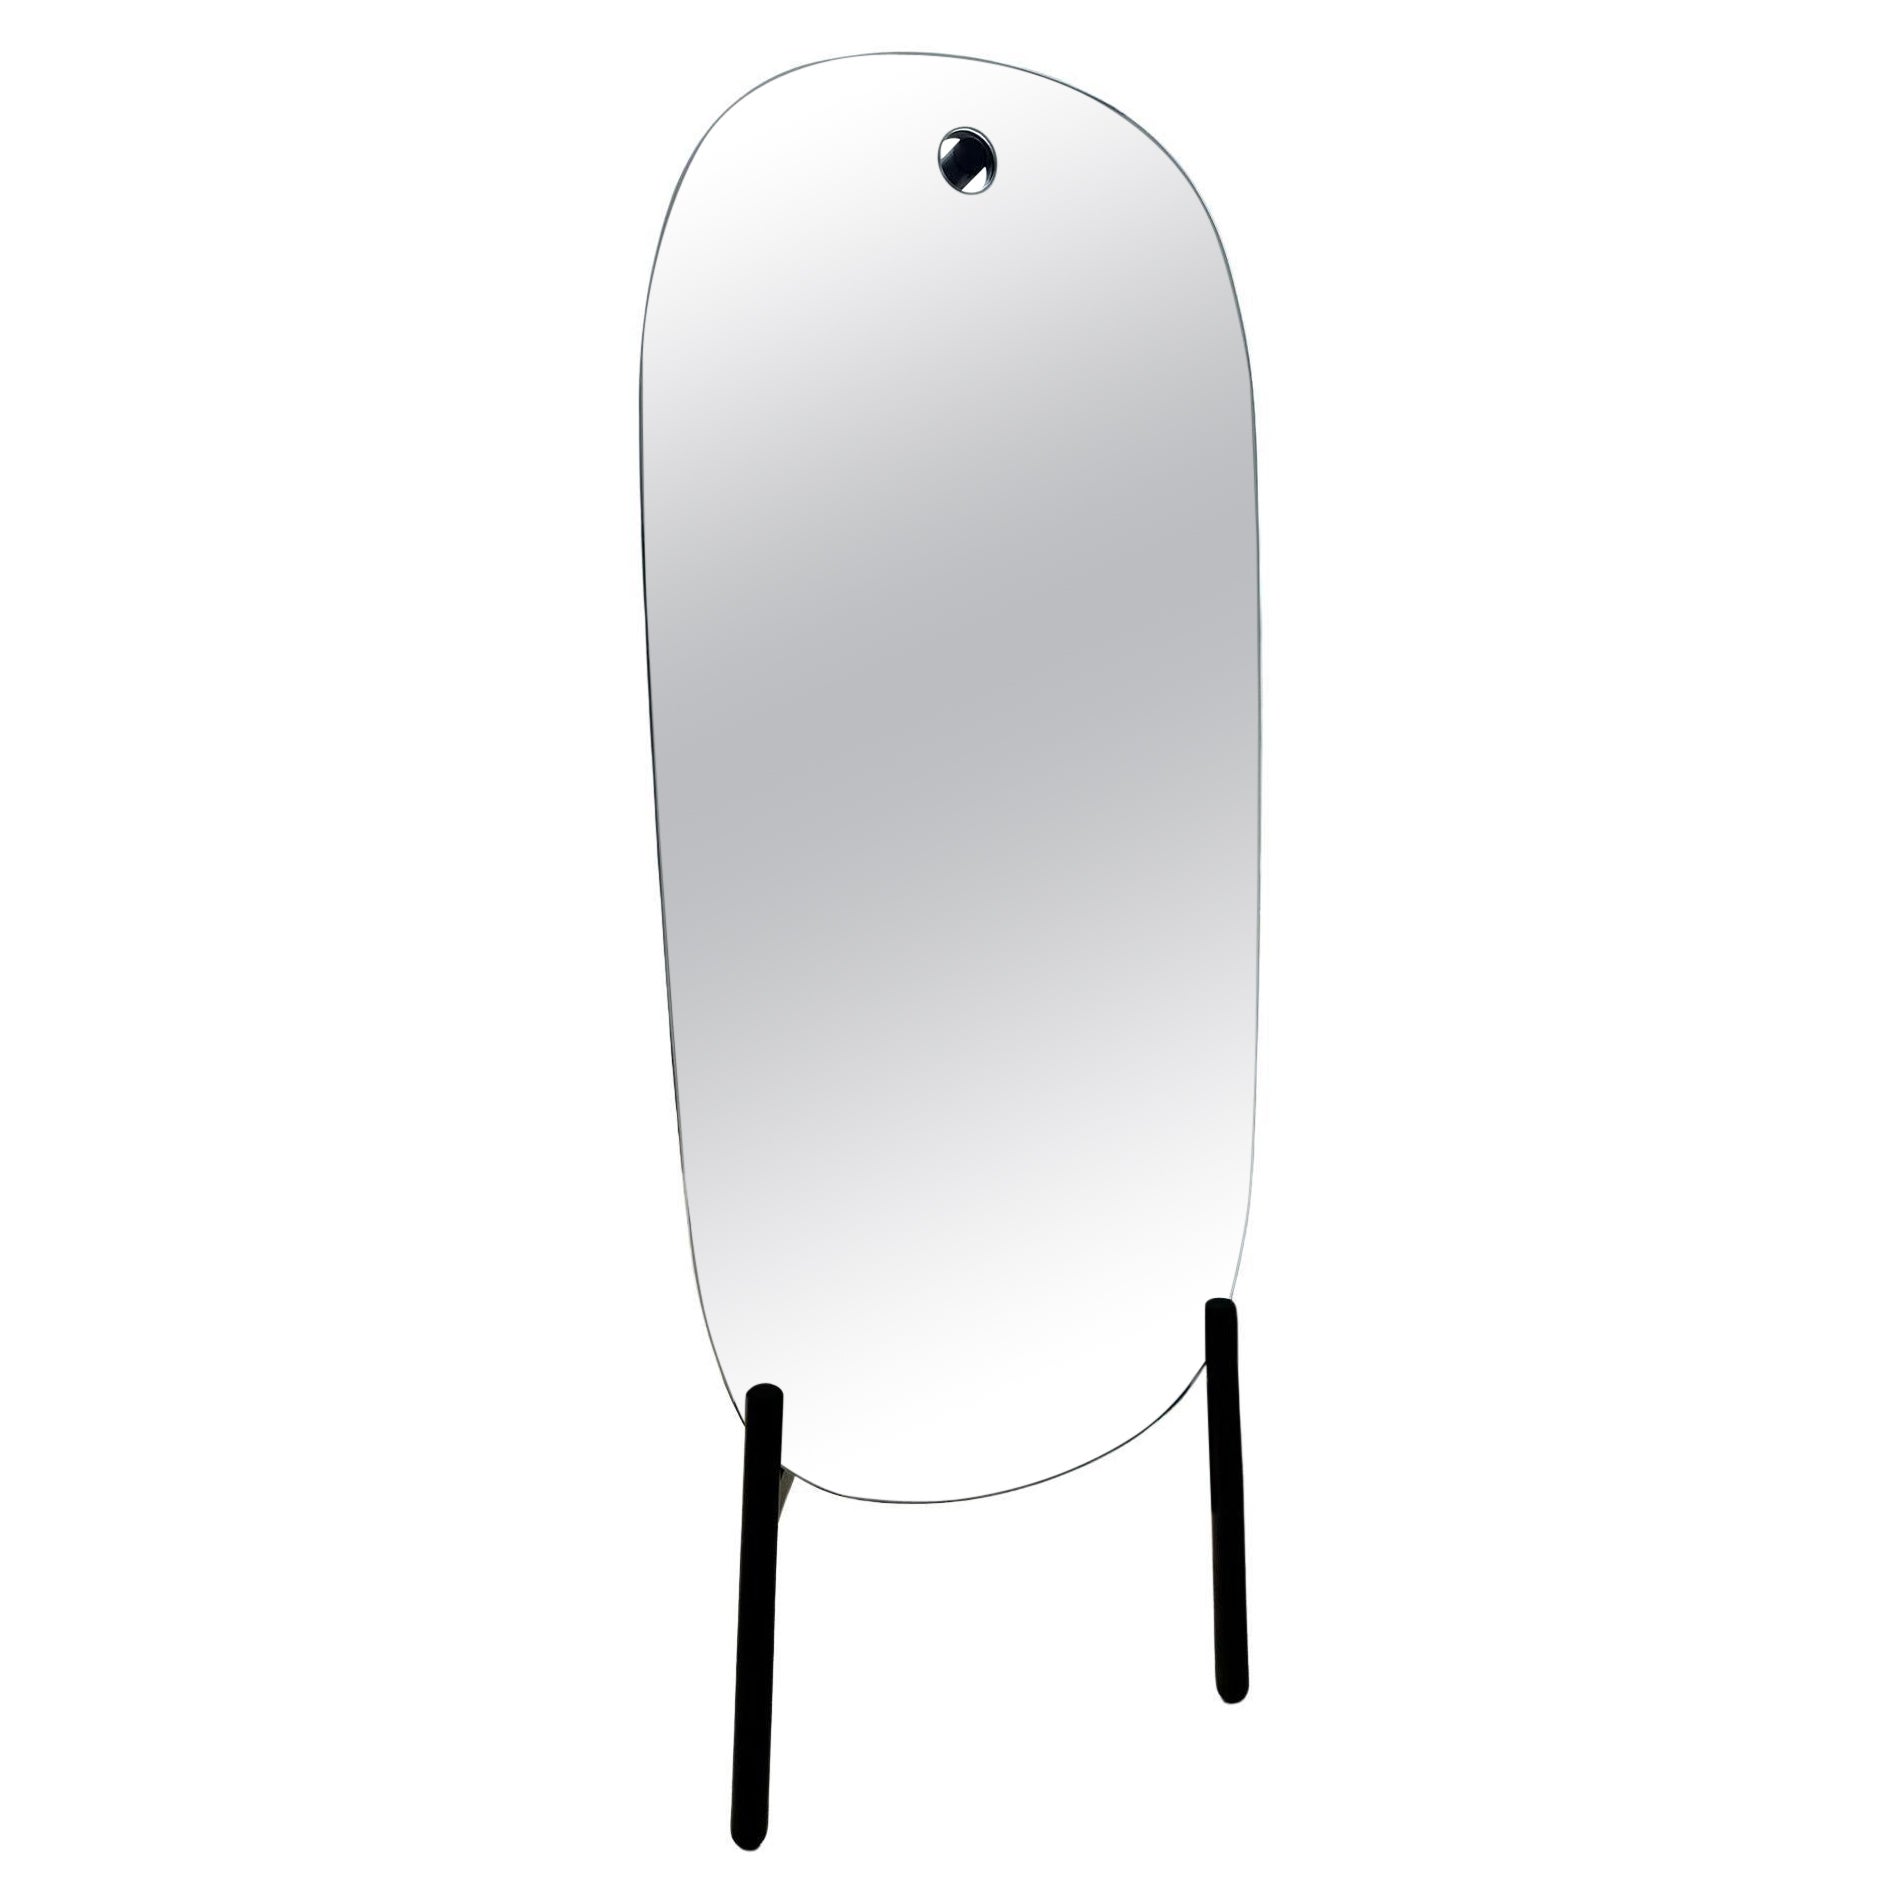 PEG STANDING MIRROR Cappellini For Sale